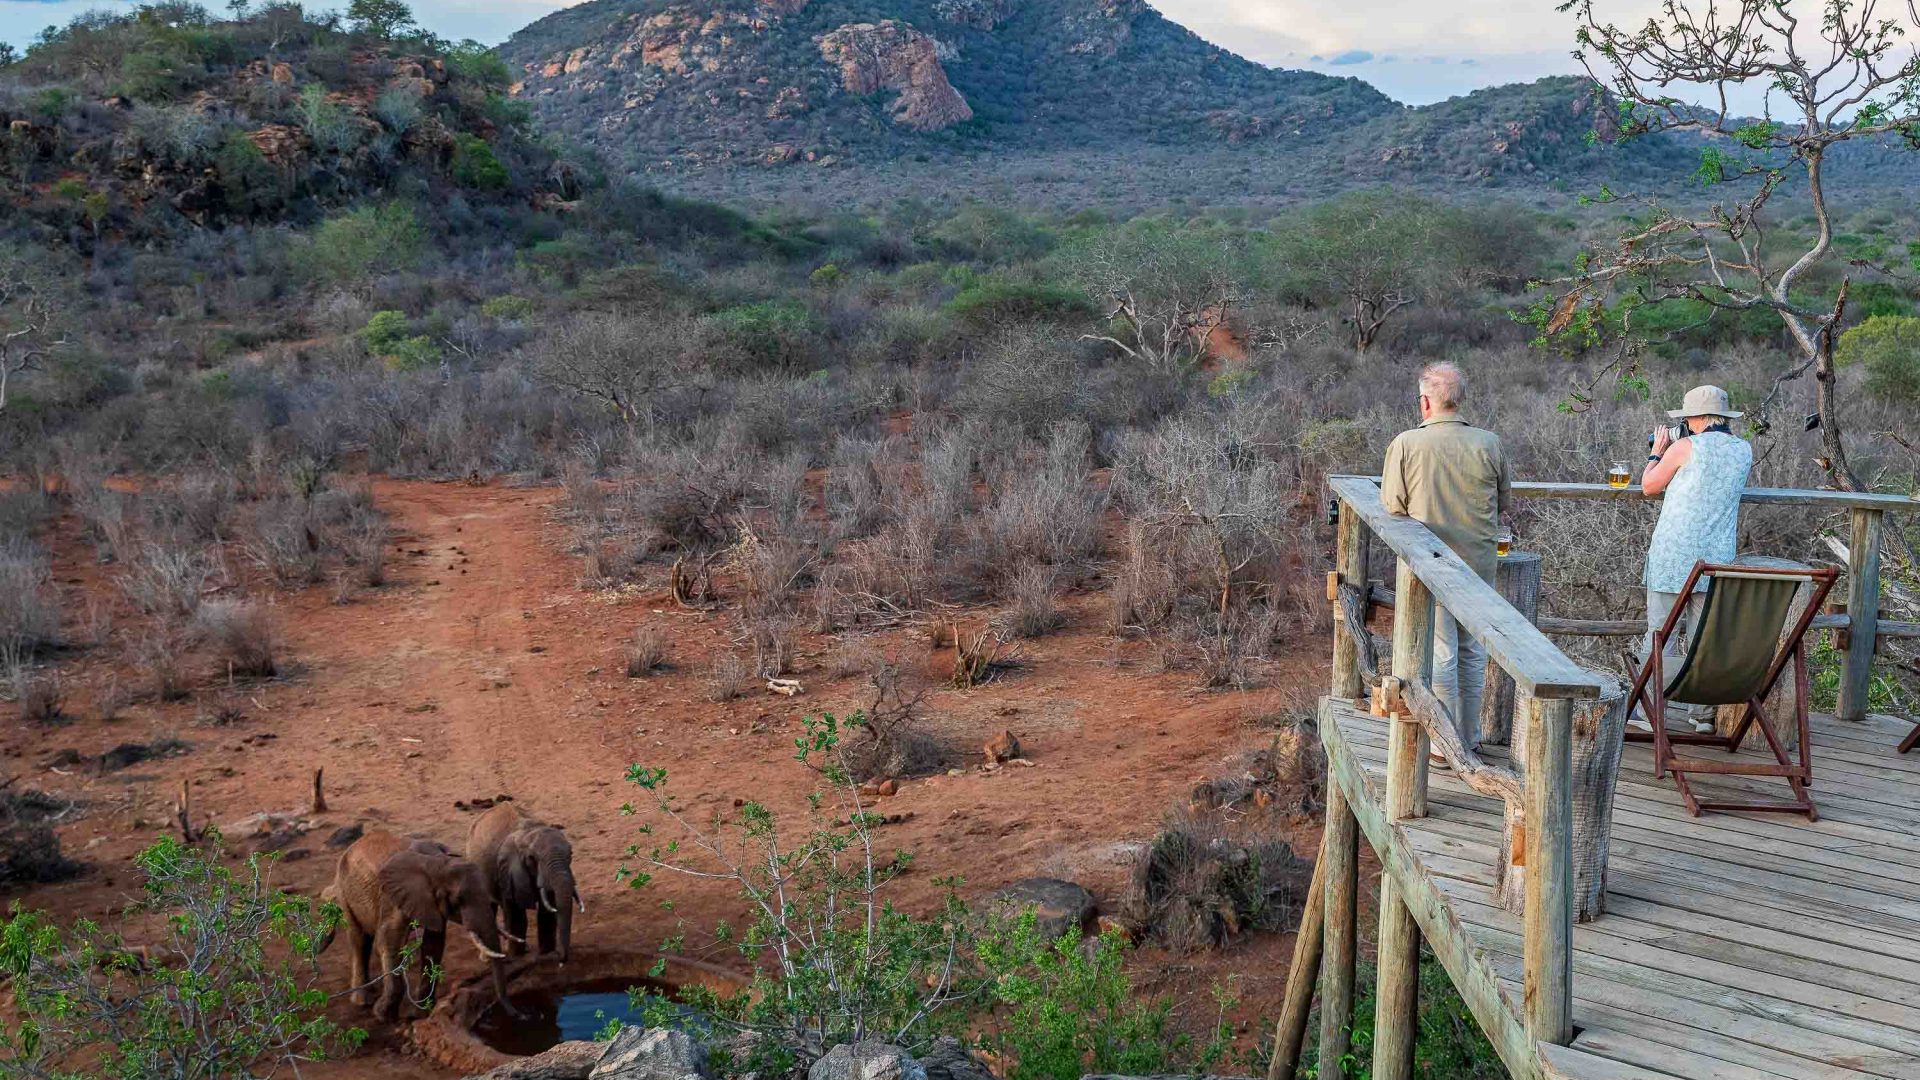 Tourists staying at Secluded Africa lodges watch from an elevated deck as elephants drink from a water hole.